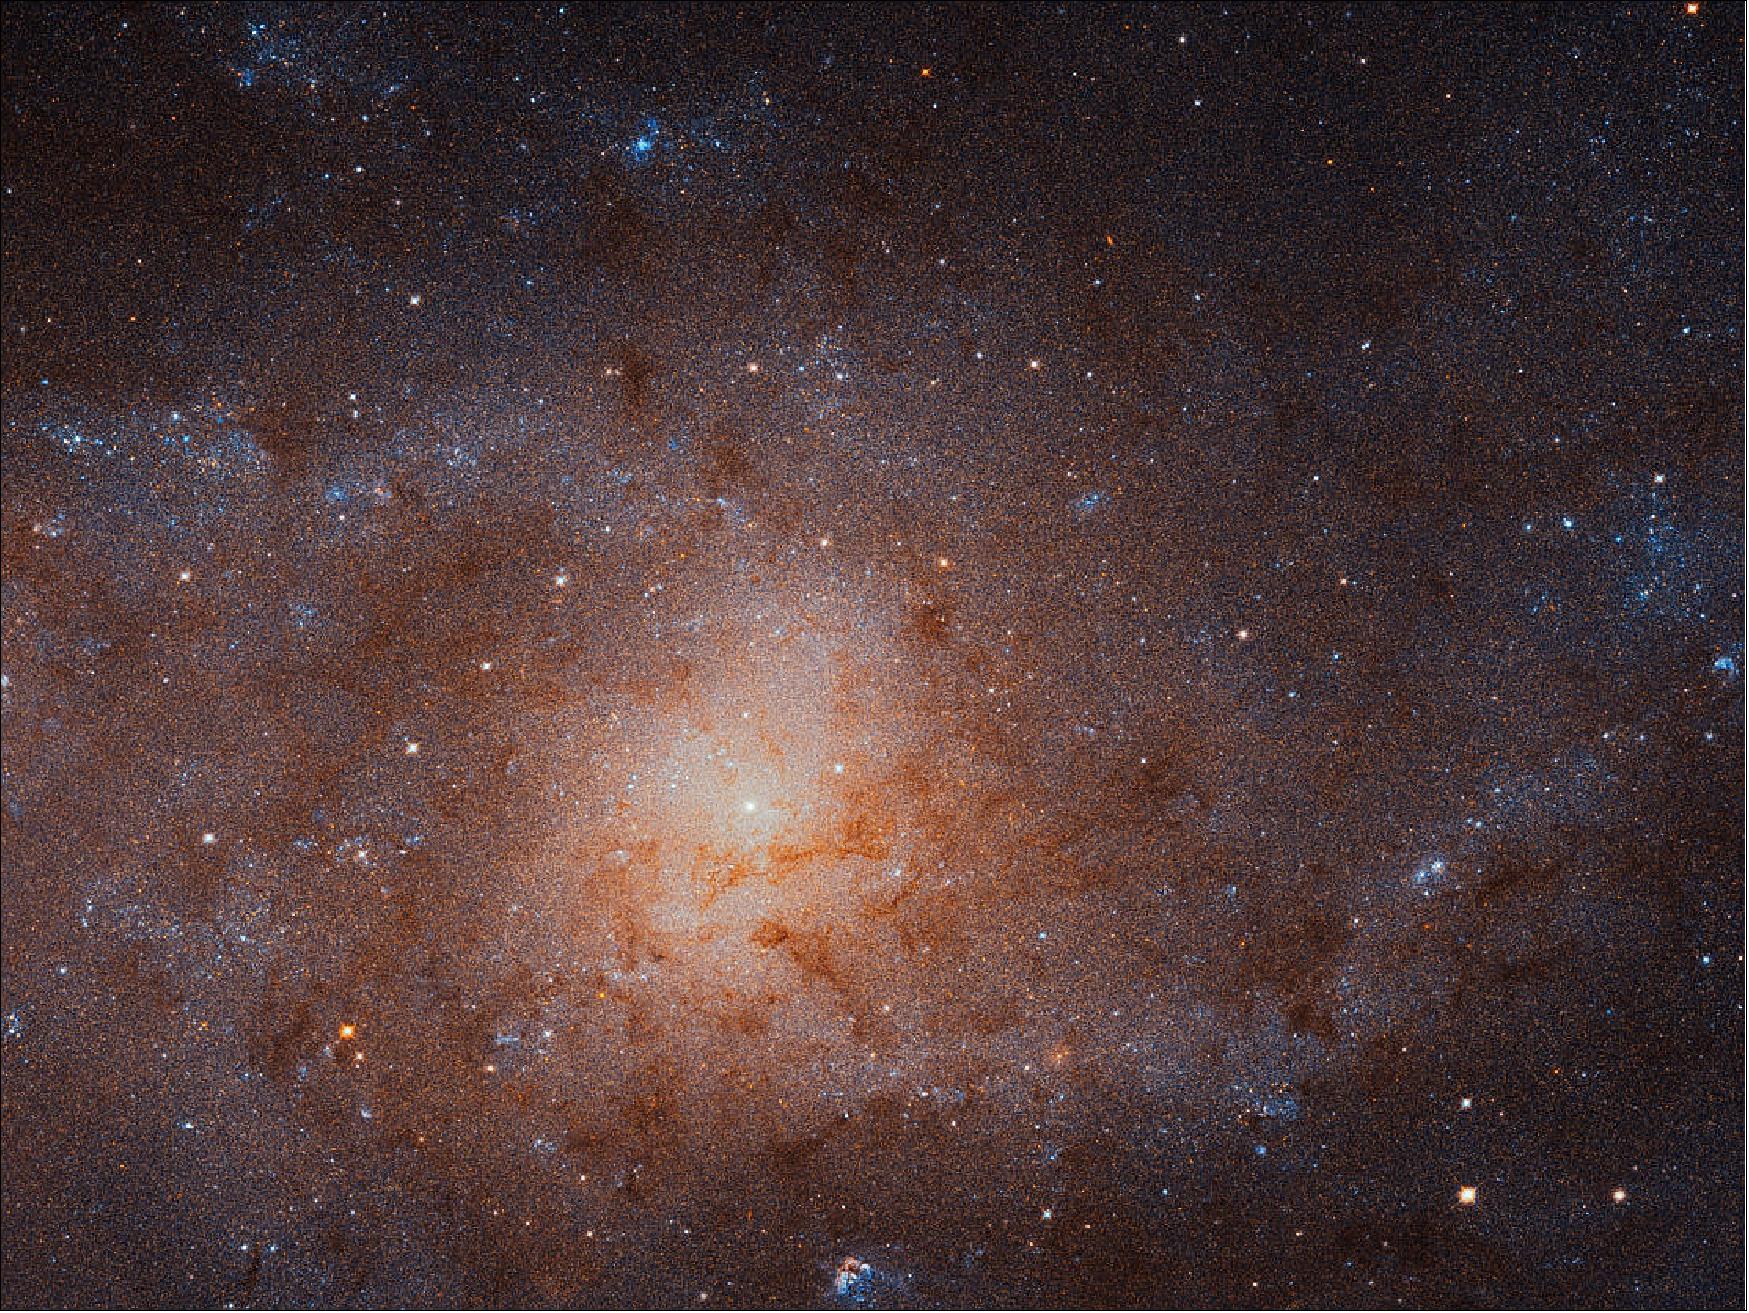 Figure 24: This gigantic image of the Triangulum Galaxy — also known as Messier 33 — is a composite of about 54 different pointings with Hubble's Advanced Camera for Surveys. With a staggering size of 34,372 x 19,345 pixels, it is the second-largest image ever released by Hubble. It is only dwarfed by the image of the Andromeda Galaxy, released in 2015. The mosaic of the Triangulum Galaxy showcases the central region of the galaxy and its inner spiral arms. Millions of stars, hundreds of star clusters and bright nebulae are visible (image credit: NASA, ESA, and M. Durbin, J. Dalcanton, and B. F. Williams (University of Washington); CC BY 4.0)